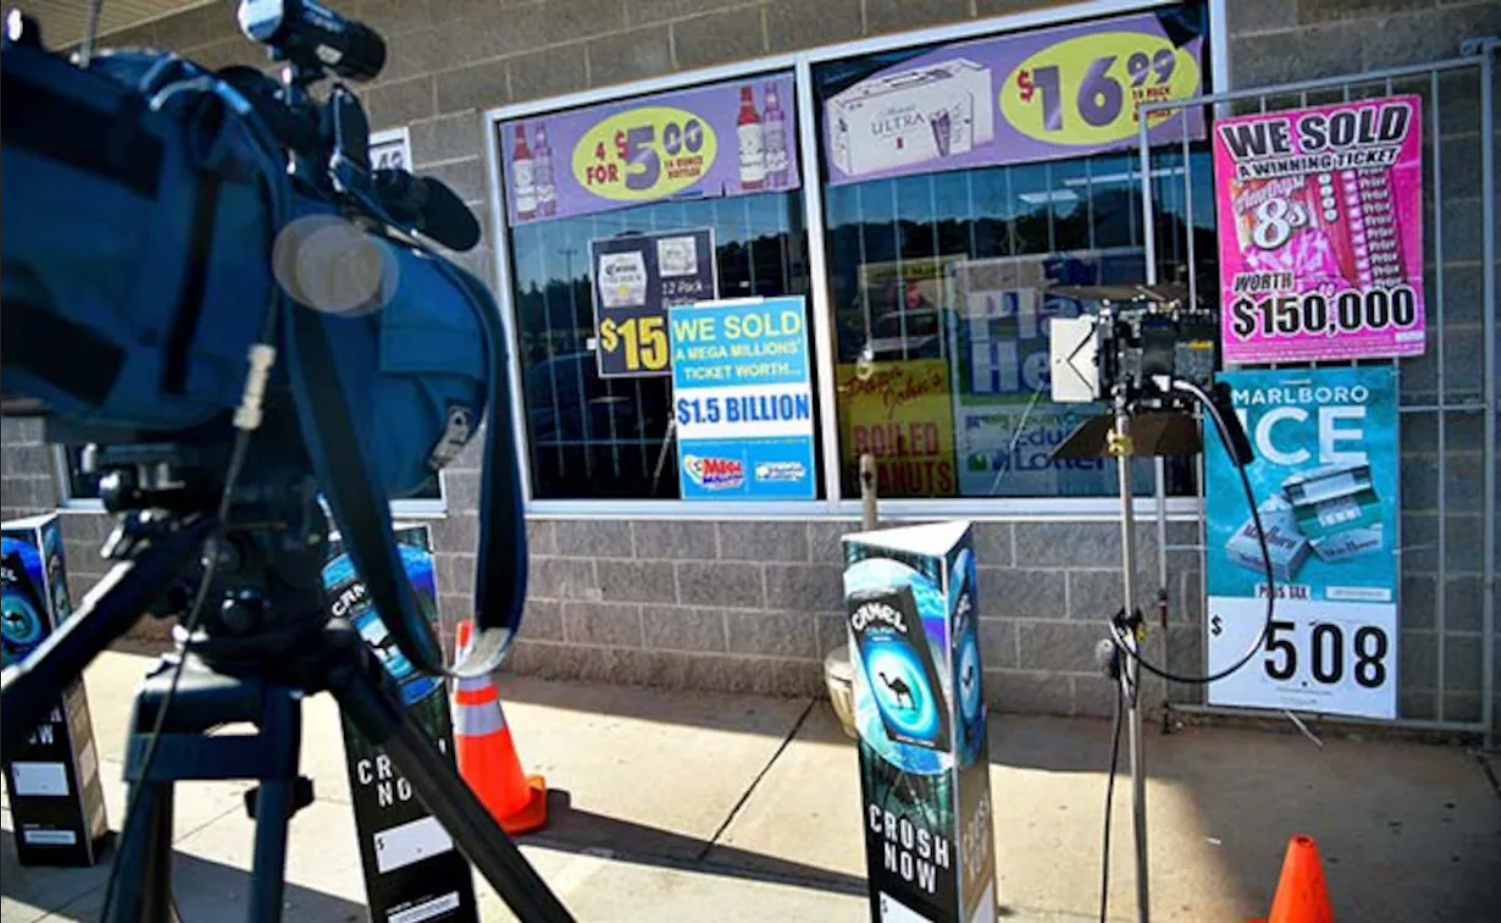 US Powerball Jackpot Soars To $1.6 Billion, Largest In History